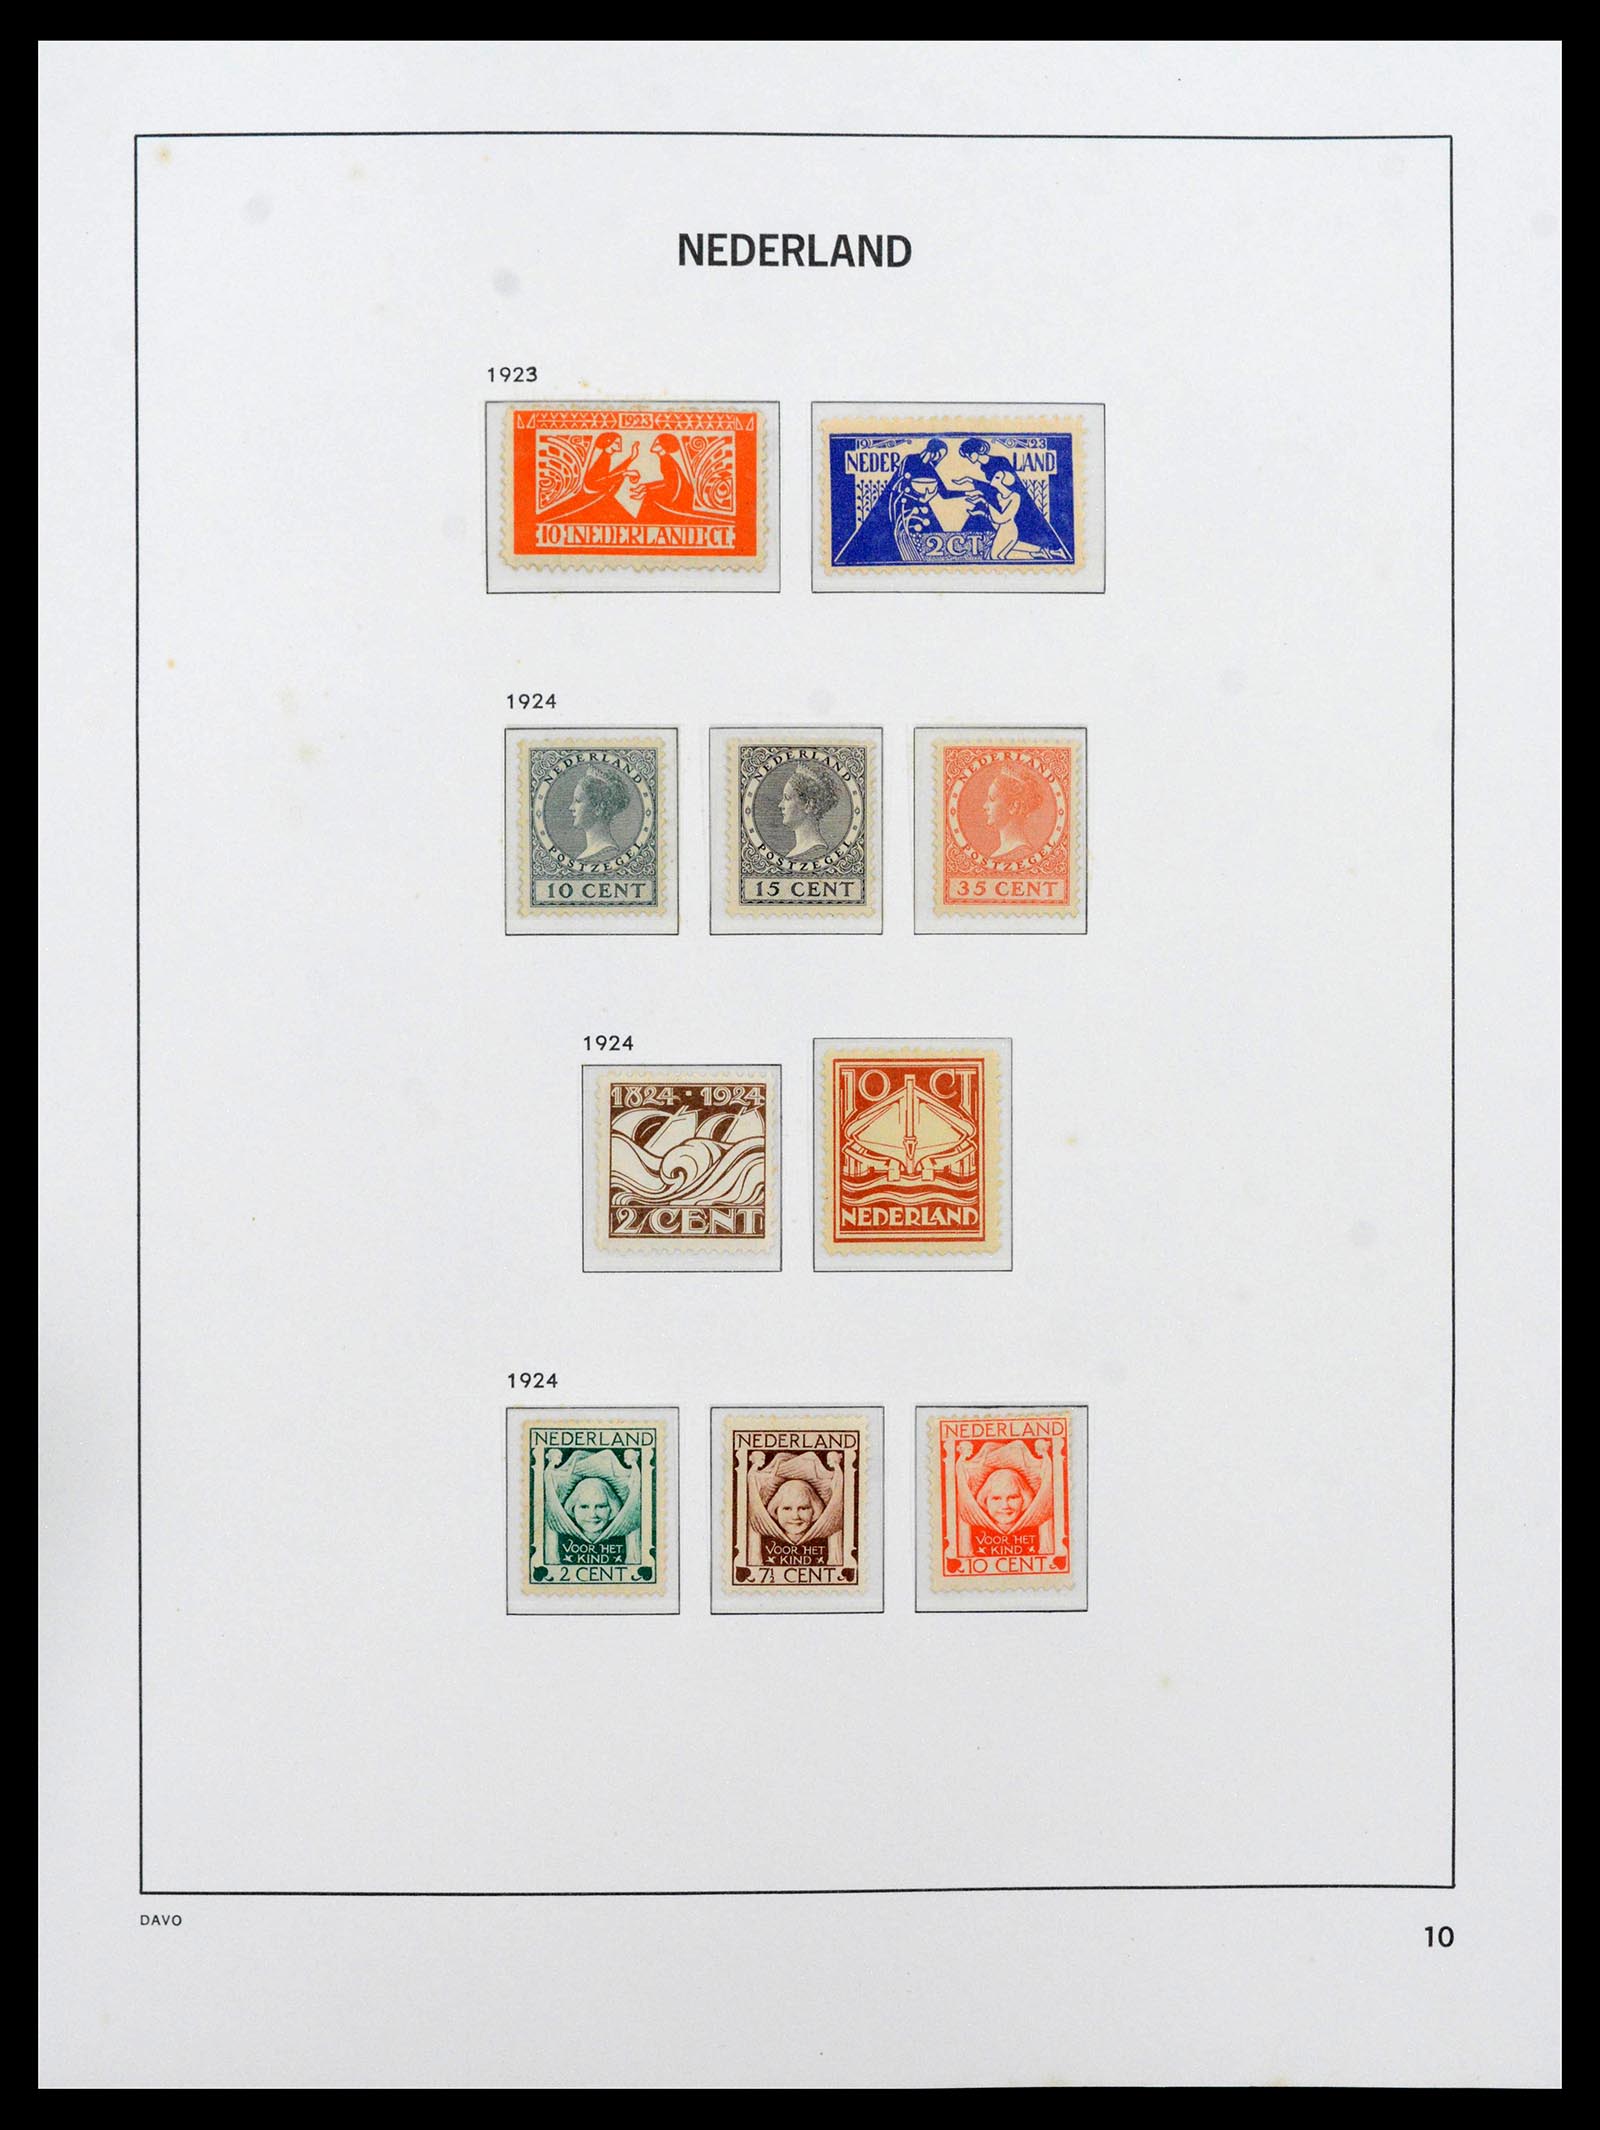 39035 0010 - Stamp collection 39035 Netherlands 1852-1968.